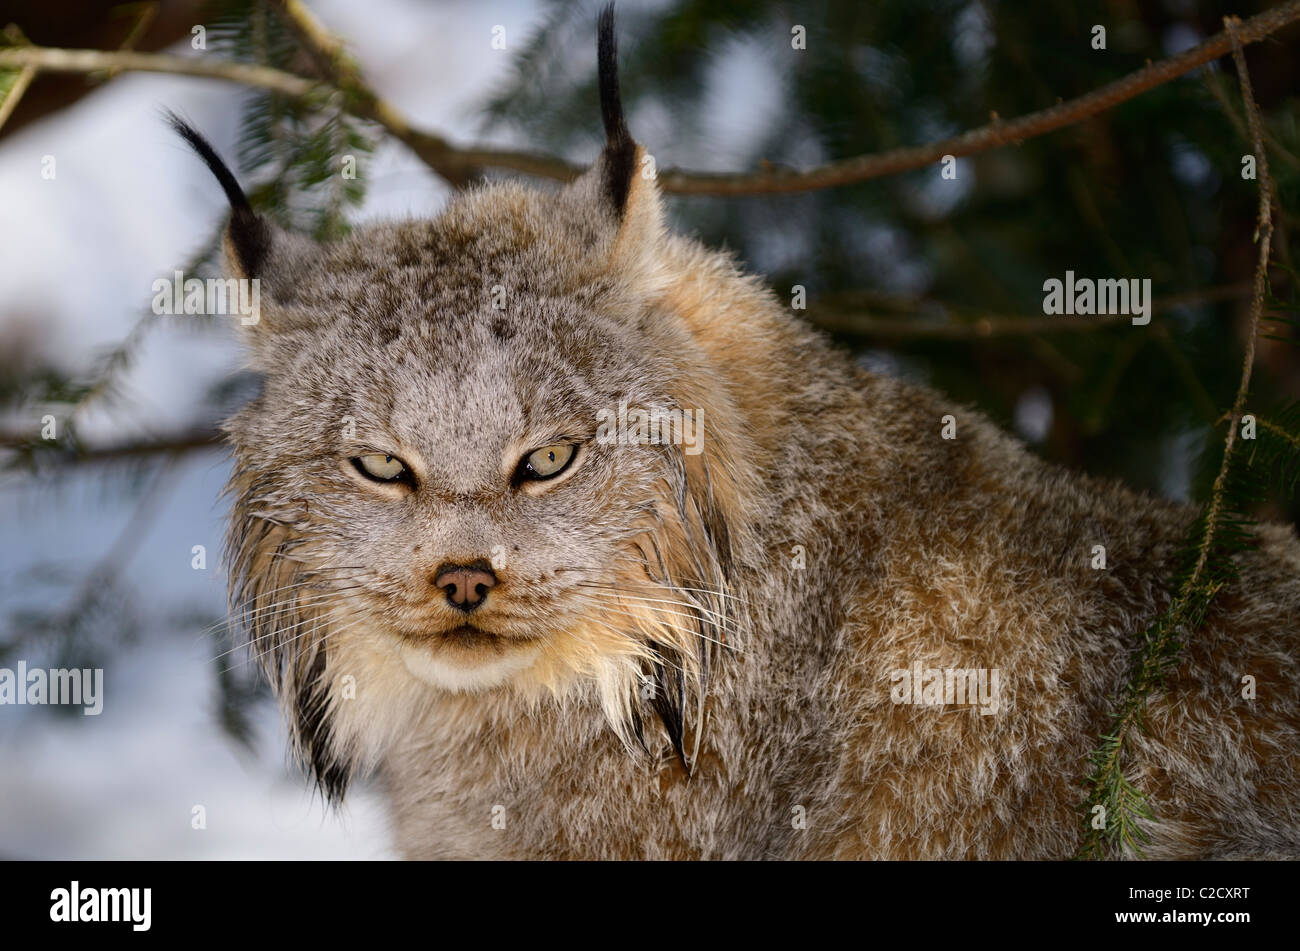 Close up of a Canada Lynx sitting under an evergreen tree in a snowy forest in winter Muskoka North Ontario Stock Photo